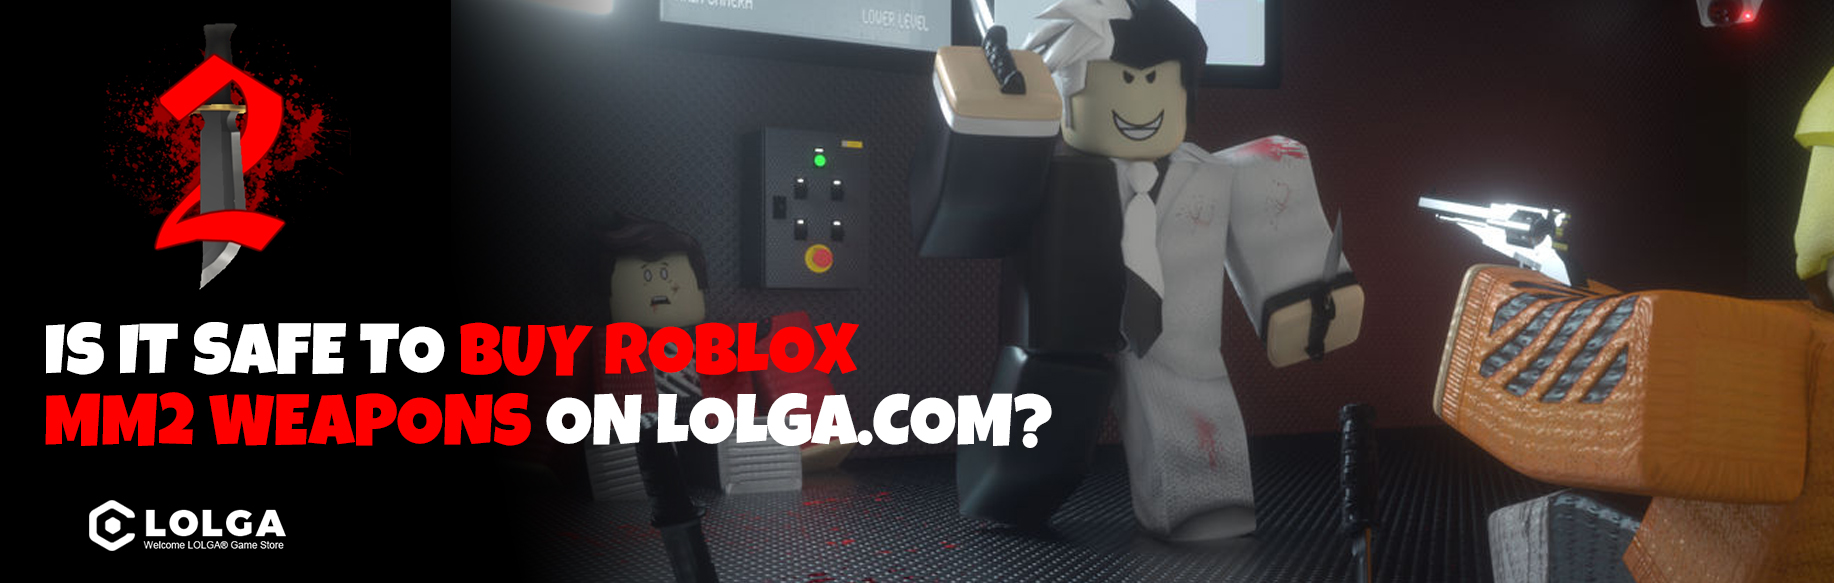 Is It Safe to Buy Roblox MM2 Weapons on Lolga.com?